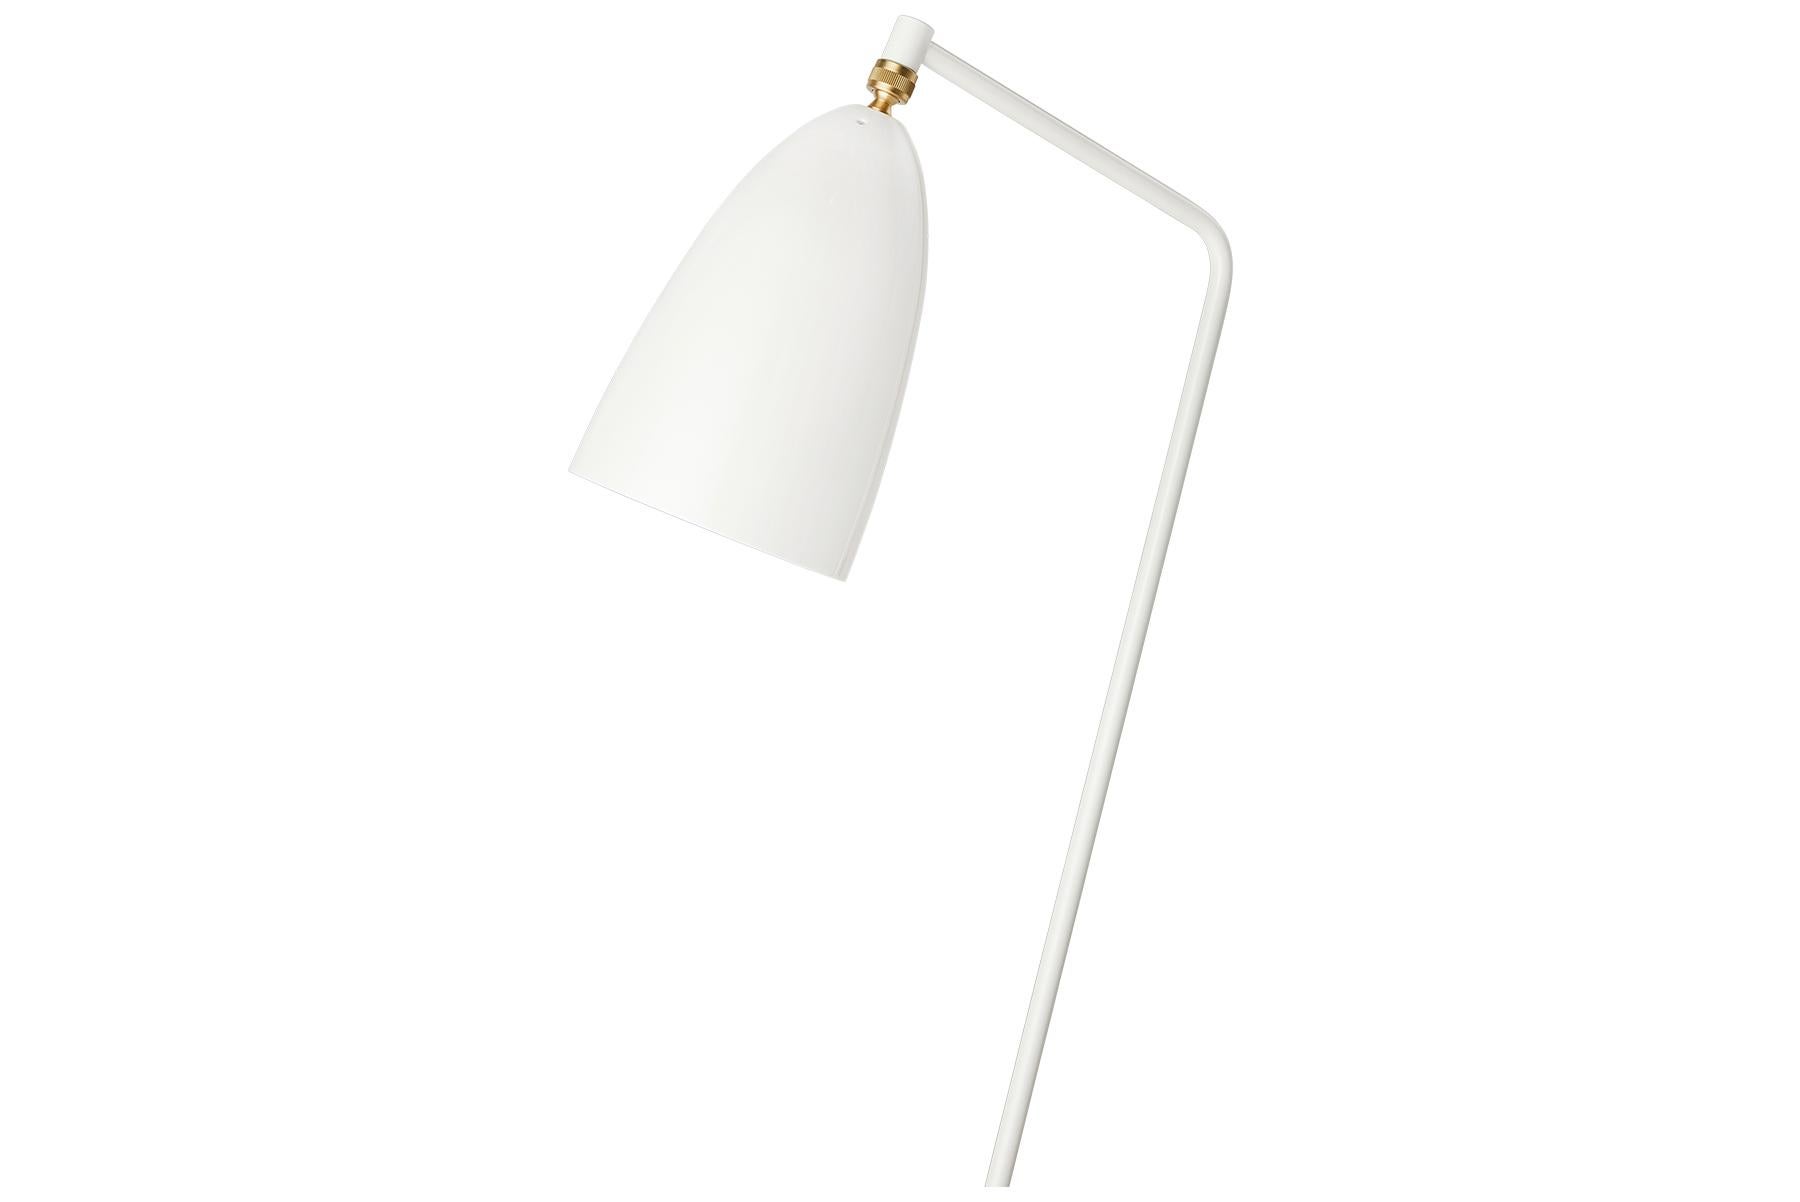 The iconic Grasshopper floor lamp was first produced in 1947 by the feminine pioneer Greta M. Grossman. The unique tripod stand of the Grasshopper Floor Lamp is tilted backward and gives the impression that the lamp is somehow alive and stalking its